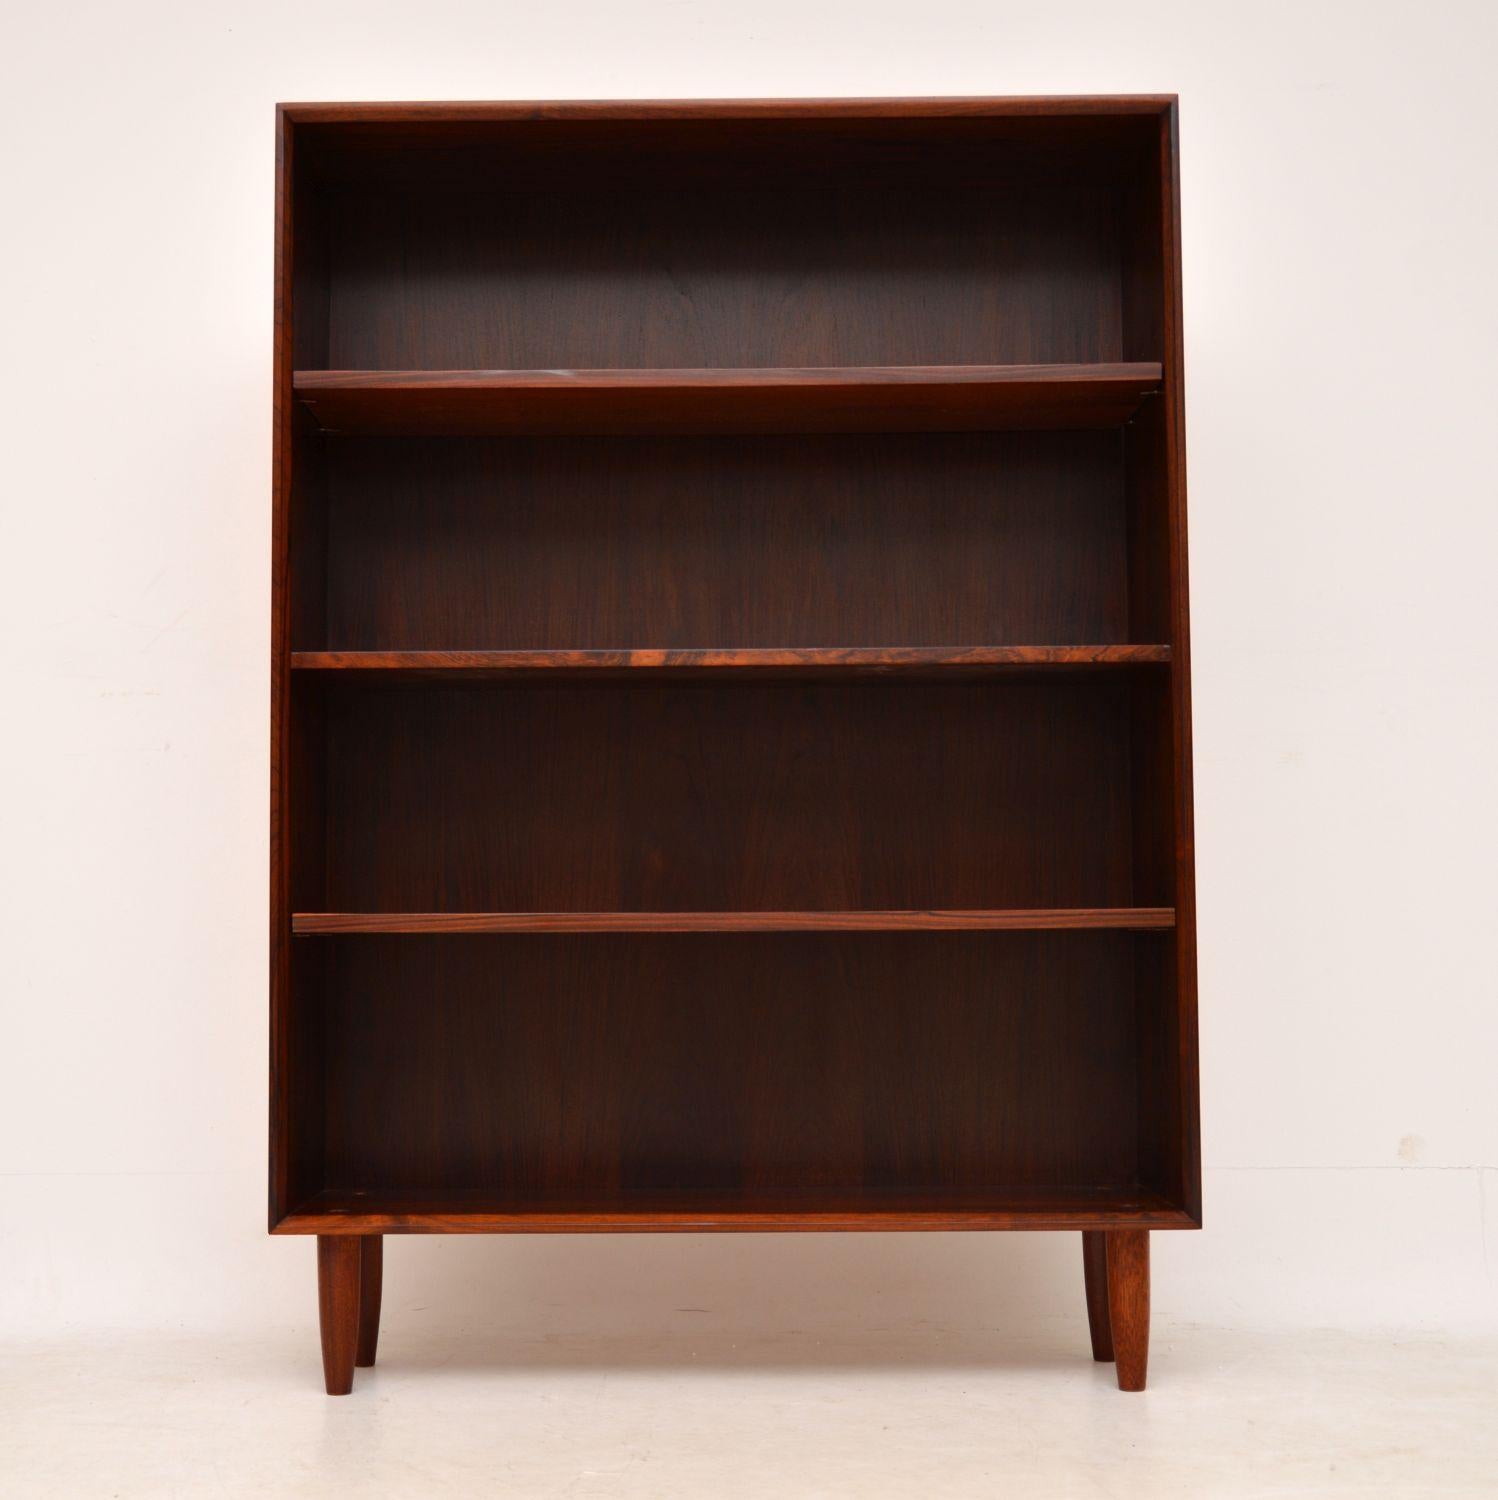 A stylish and useful vintage Danish bookcase, this was made in Denmark in the 1960s. We have had this stripped and re-polished to a very high standard, the condition is superb throughout. This has a gorgeous colour and beautiful grain patterns. The